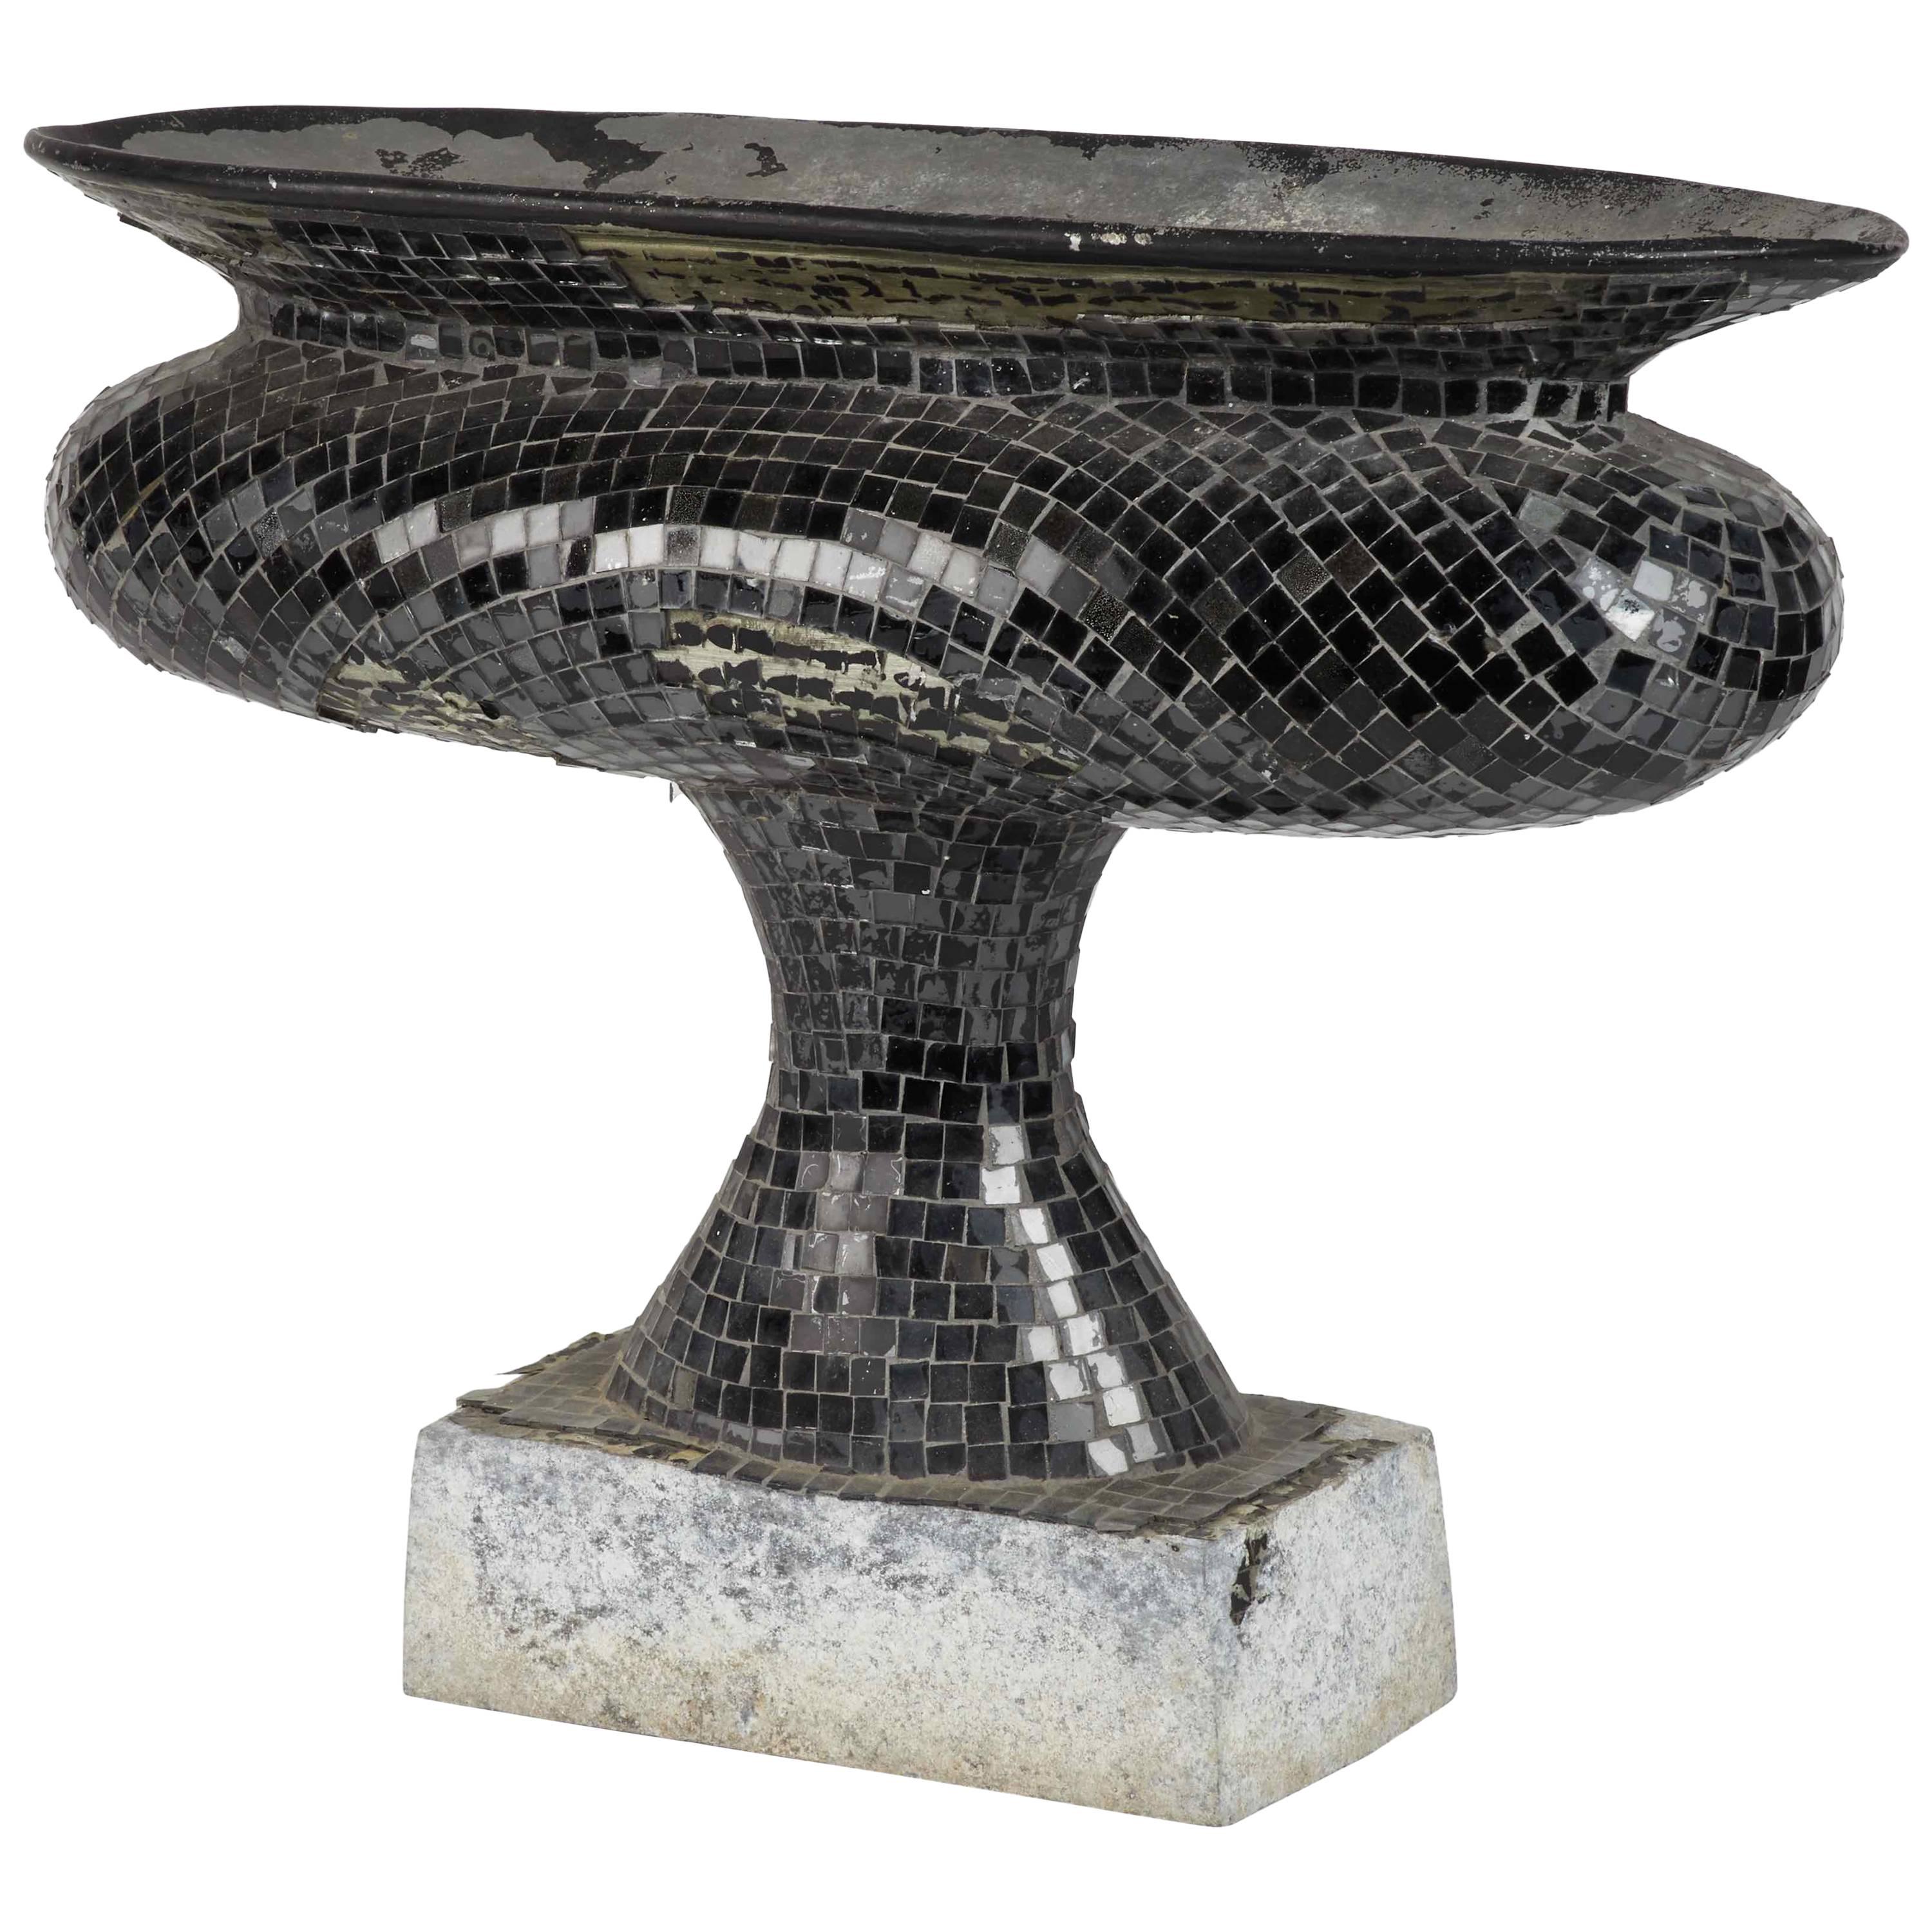 A Late 19th Century Marble Urn with Glass Mosaic Decoration